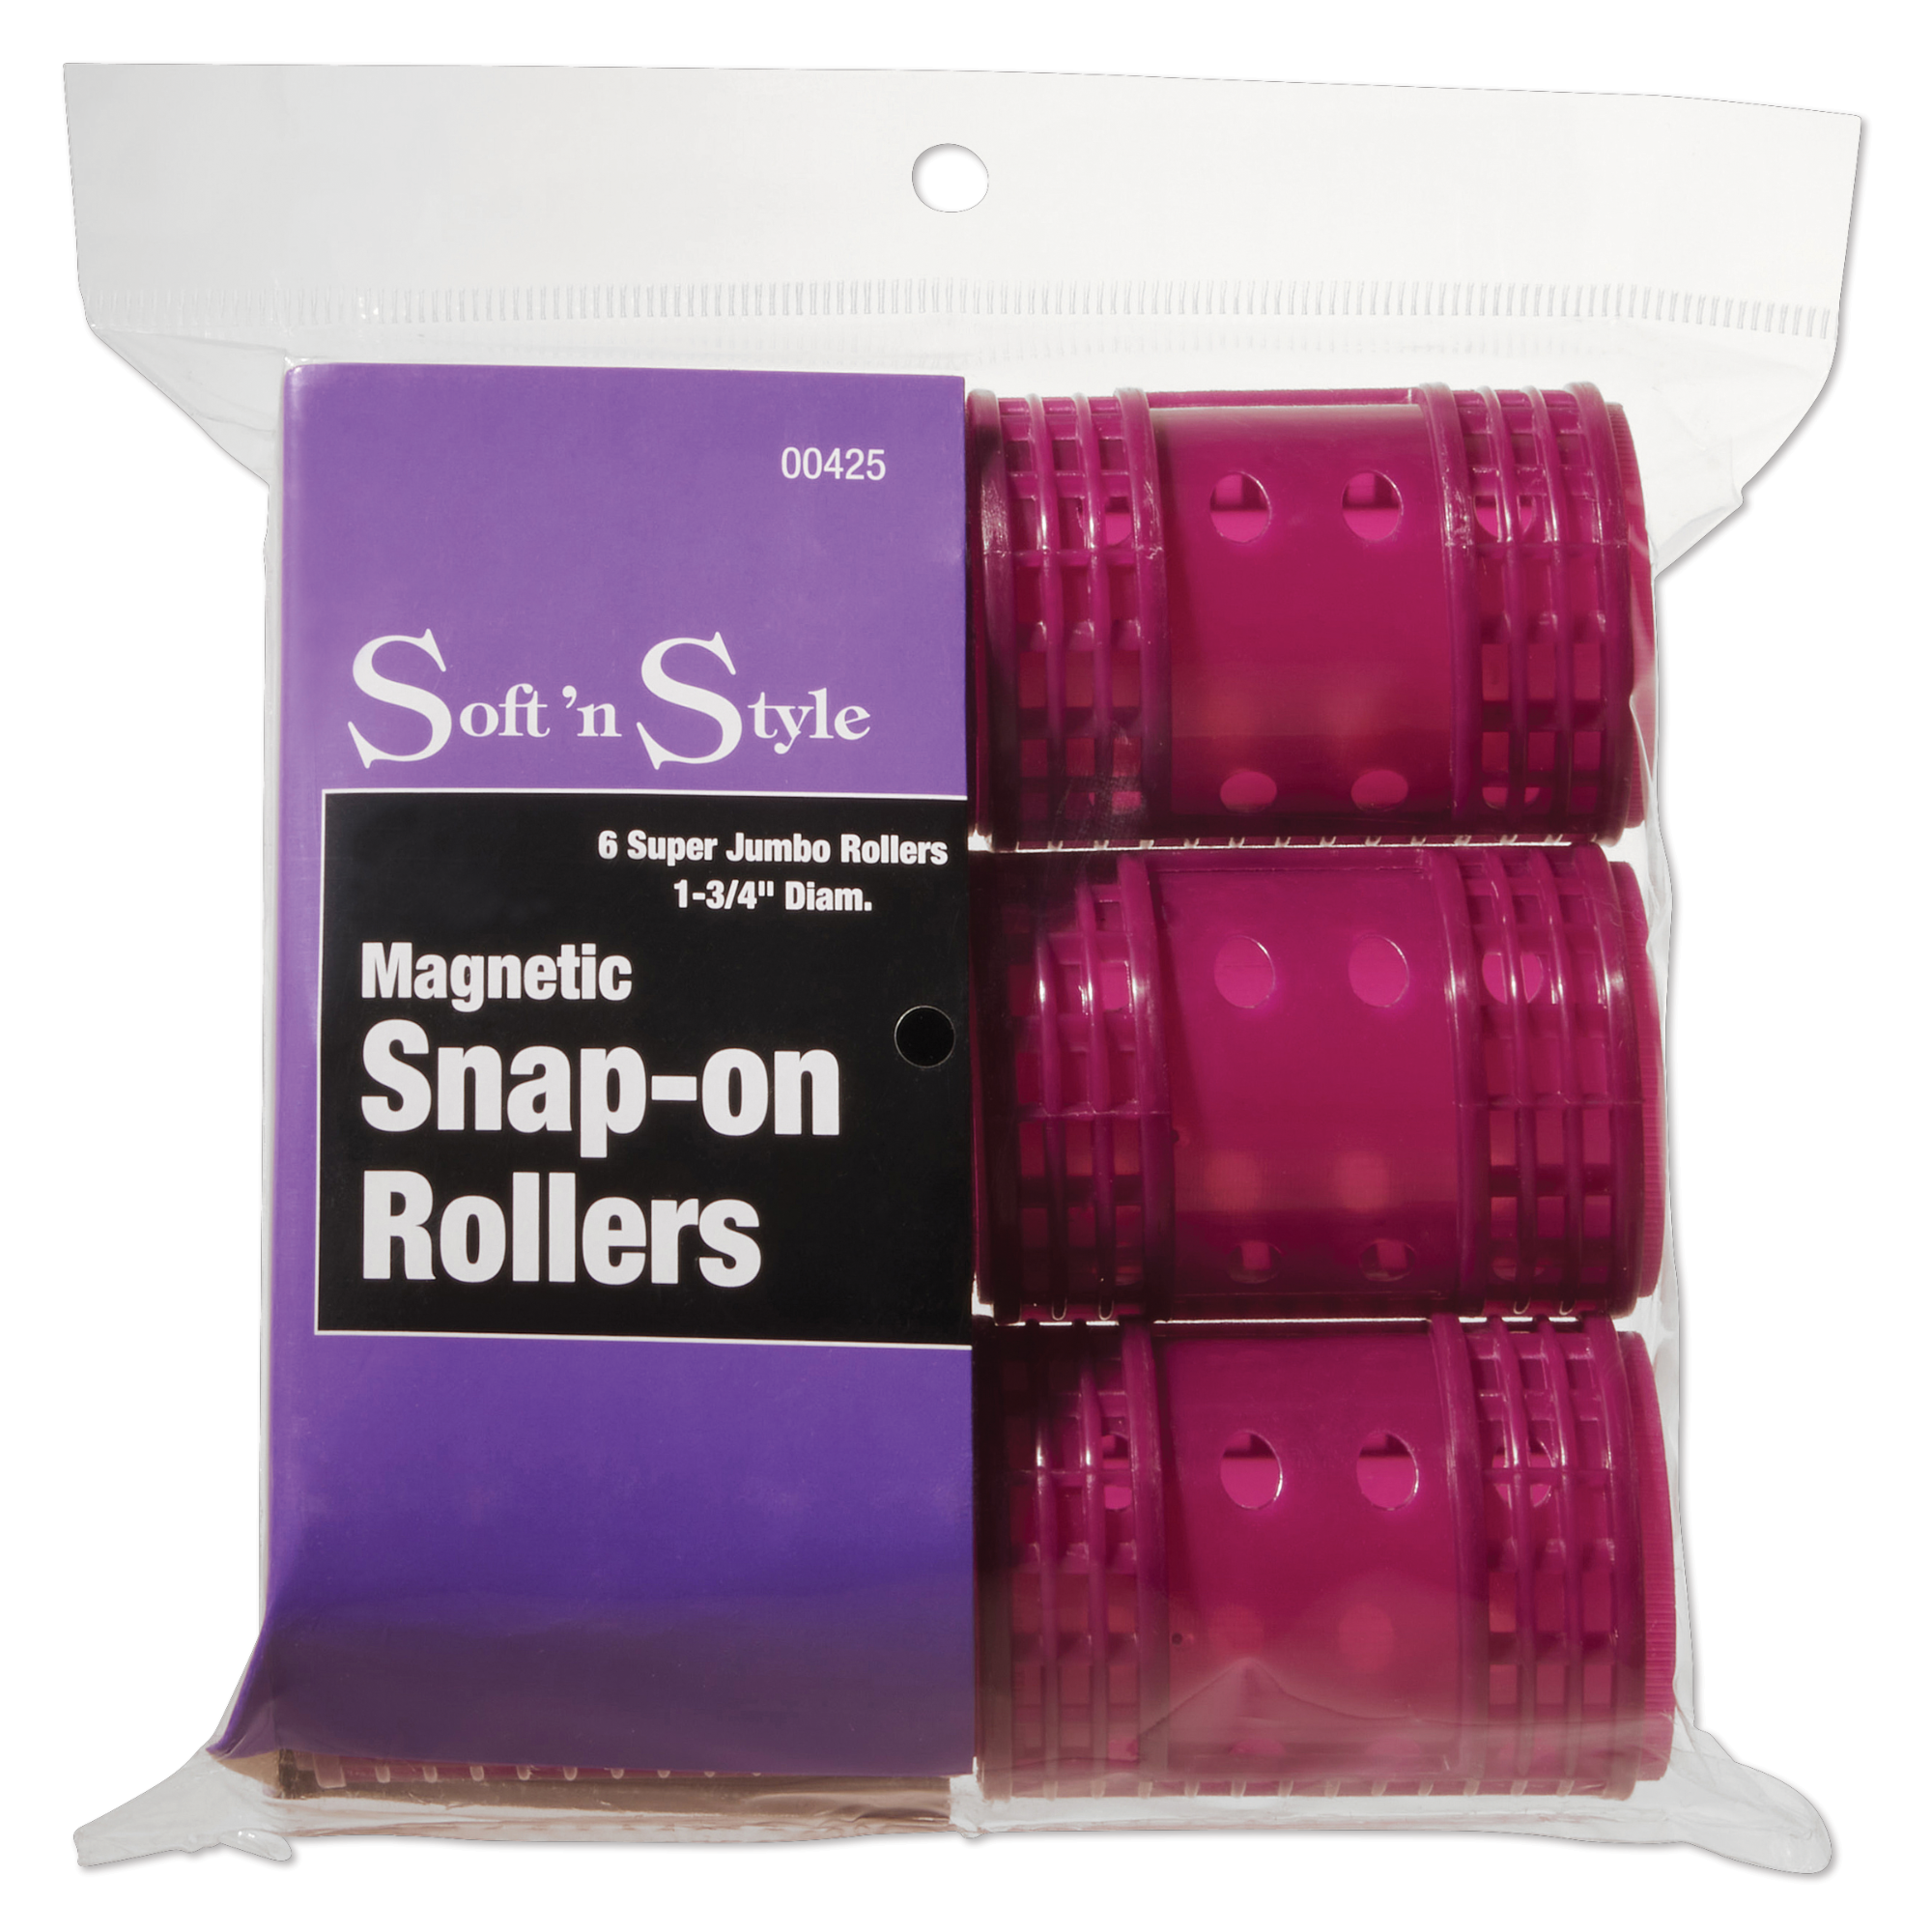 Magnetic Snap-on Rollers, Super Jumbo - 1-3/4"